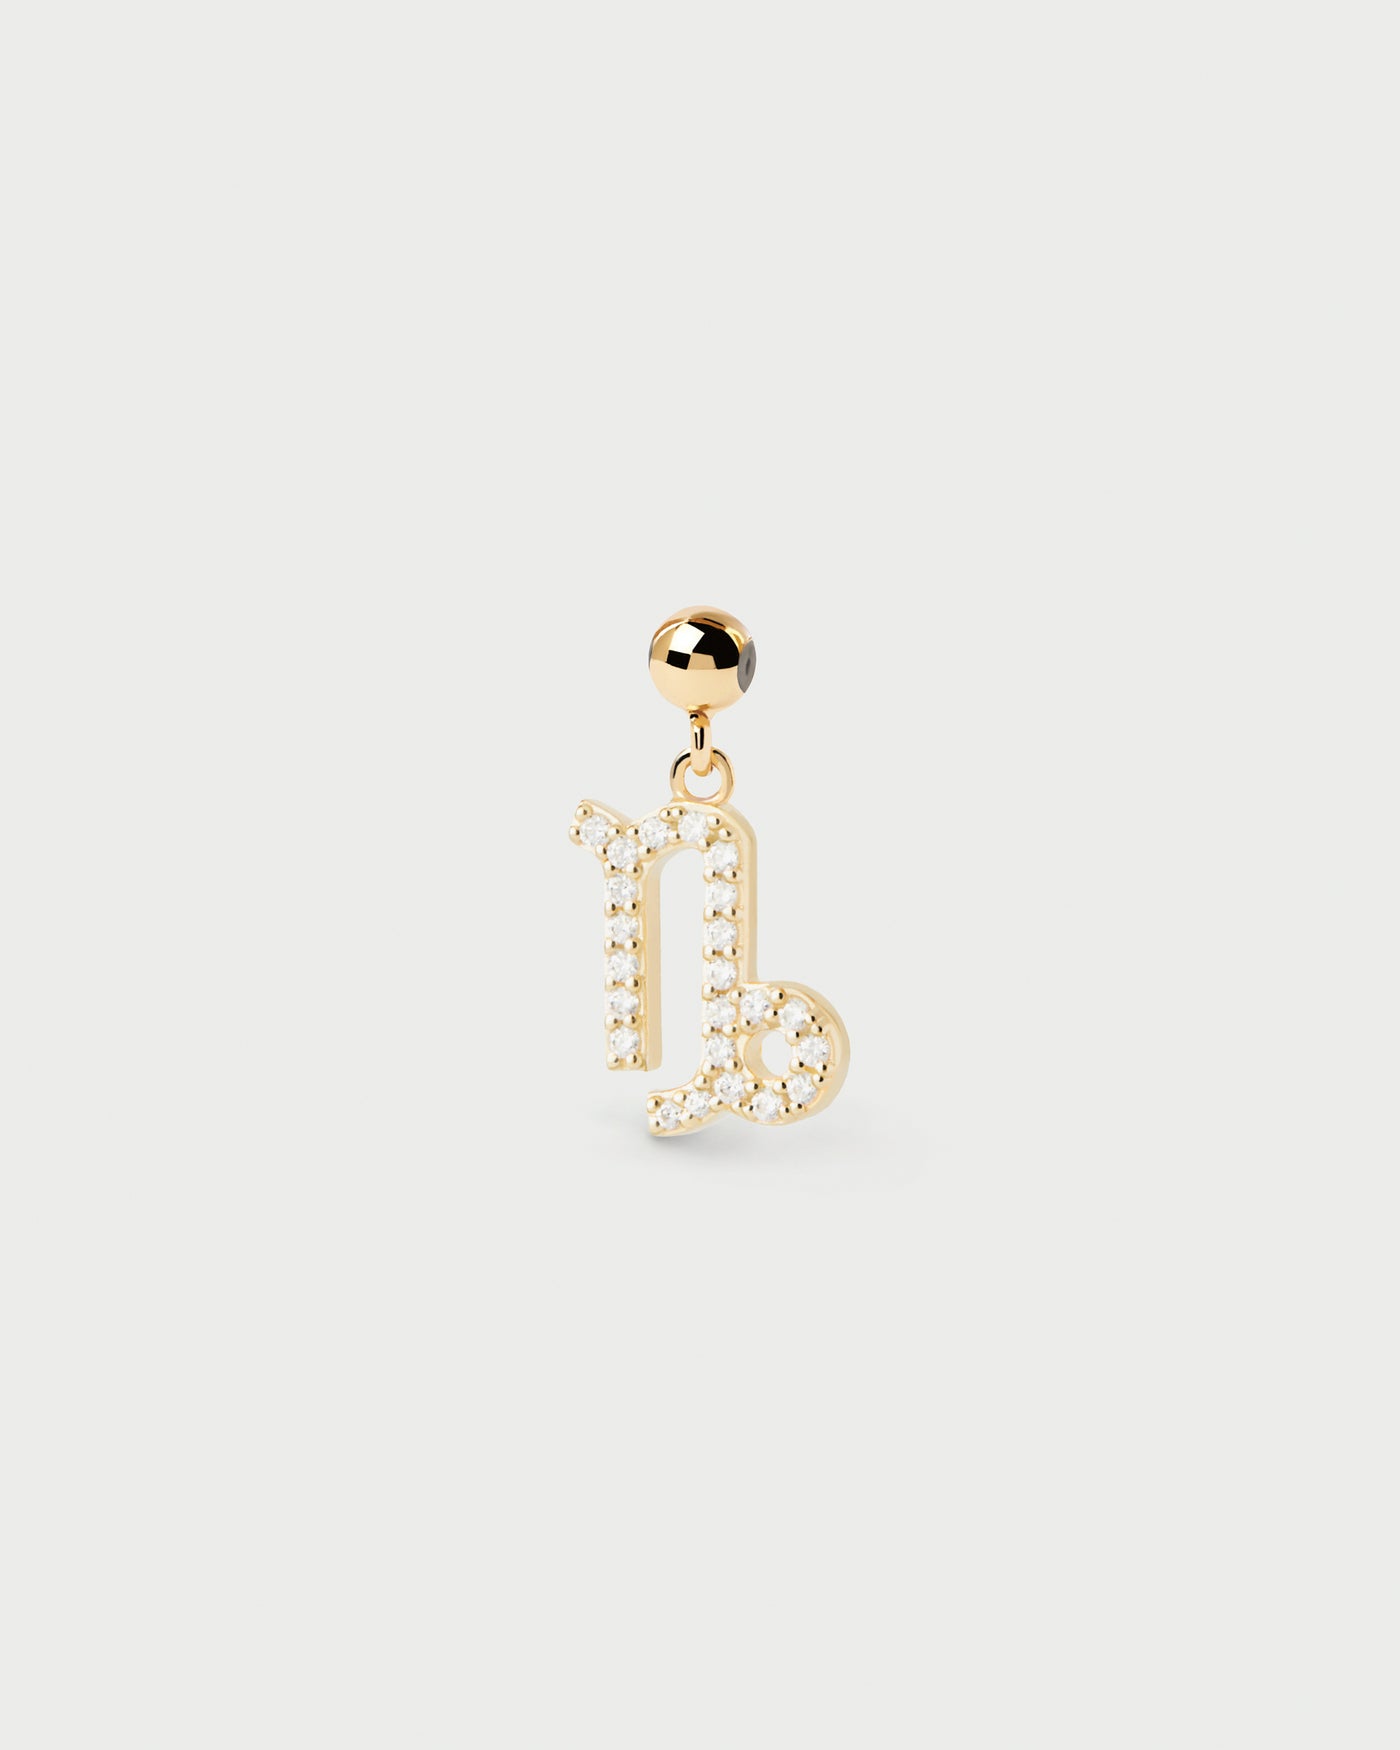 Capricorn Zodiac Charm Capricorn zodiac sign charm adorned with white zirconia to customize necklace or bracelet . Get the latest arrival from PDPAOLA. Place your order safely and get this Best Seller. Free Shipping.